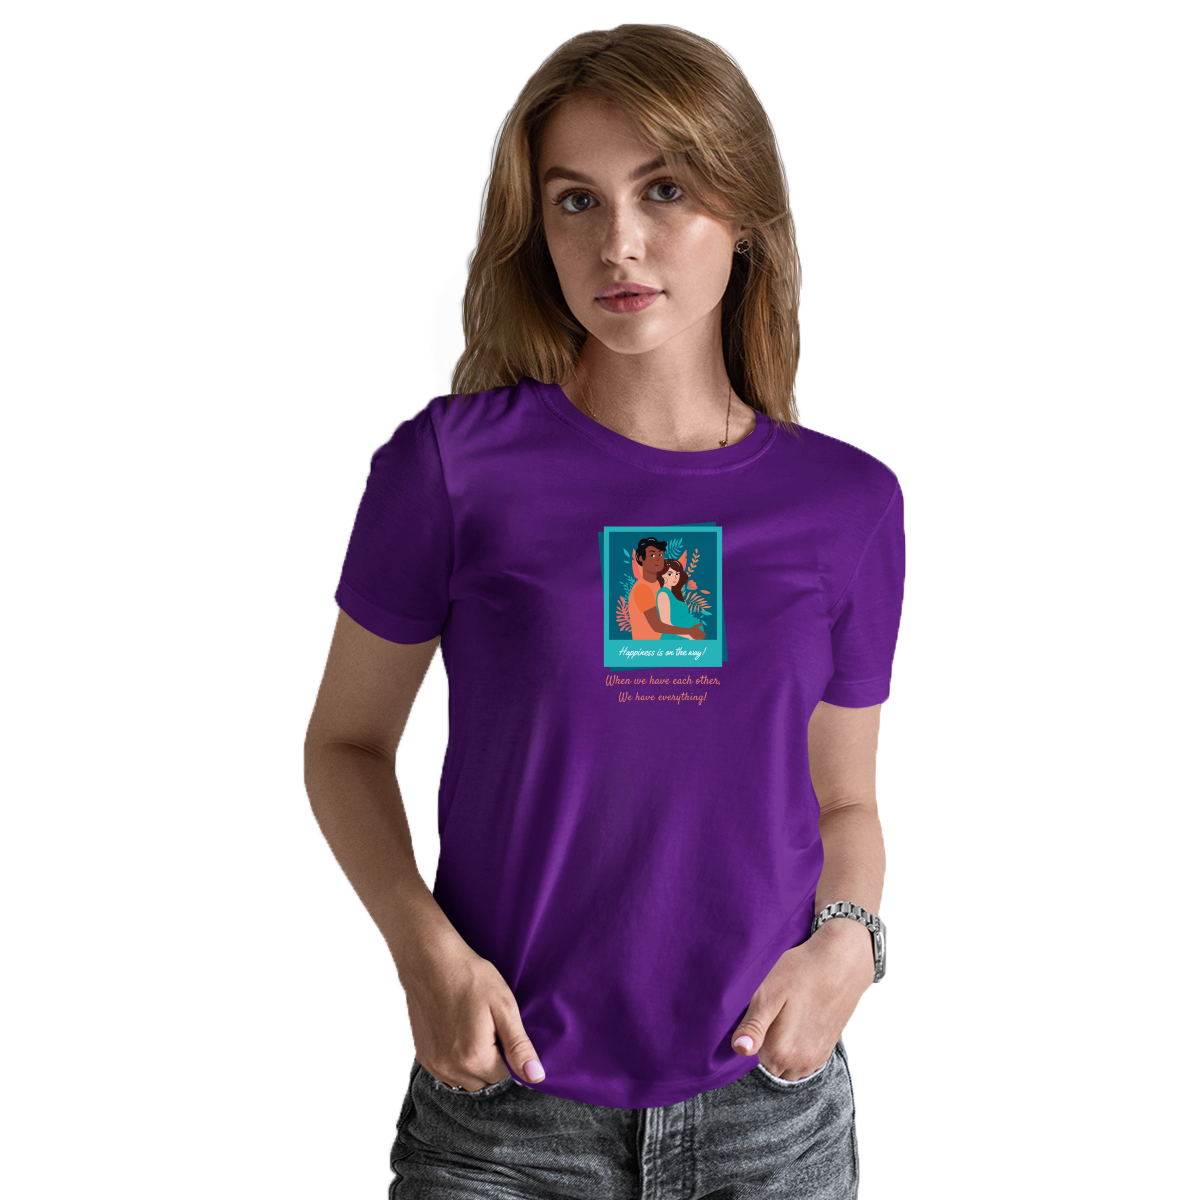 Happiness is on the way Women's T-shirt | Purple